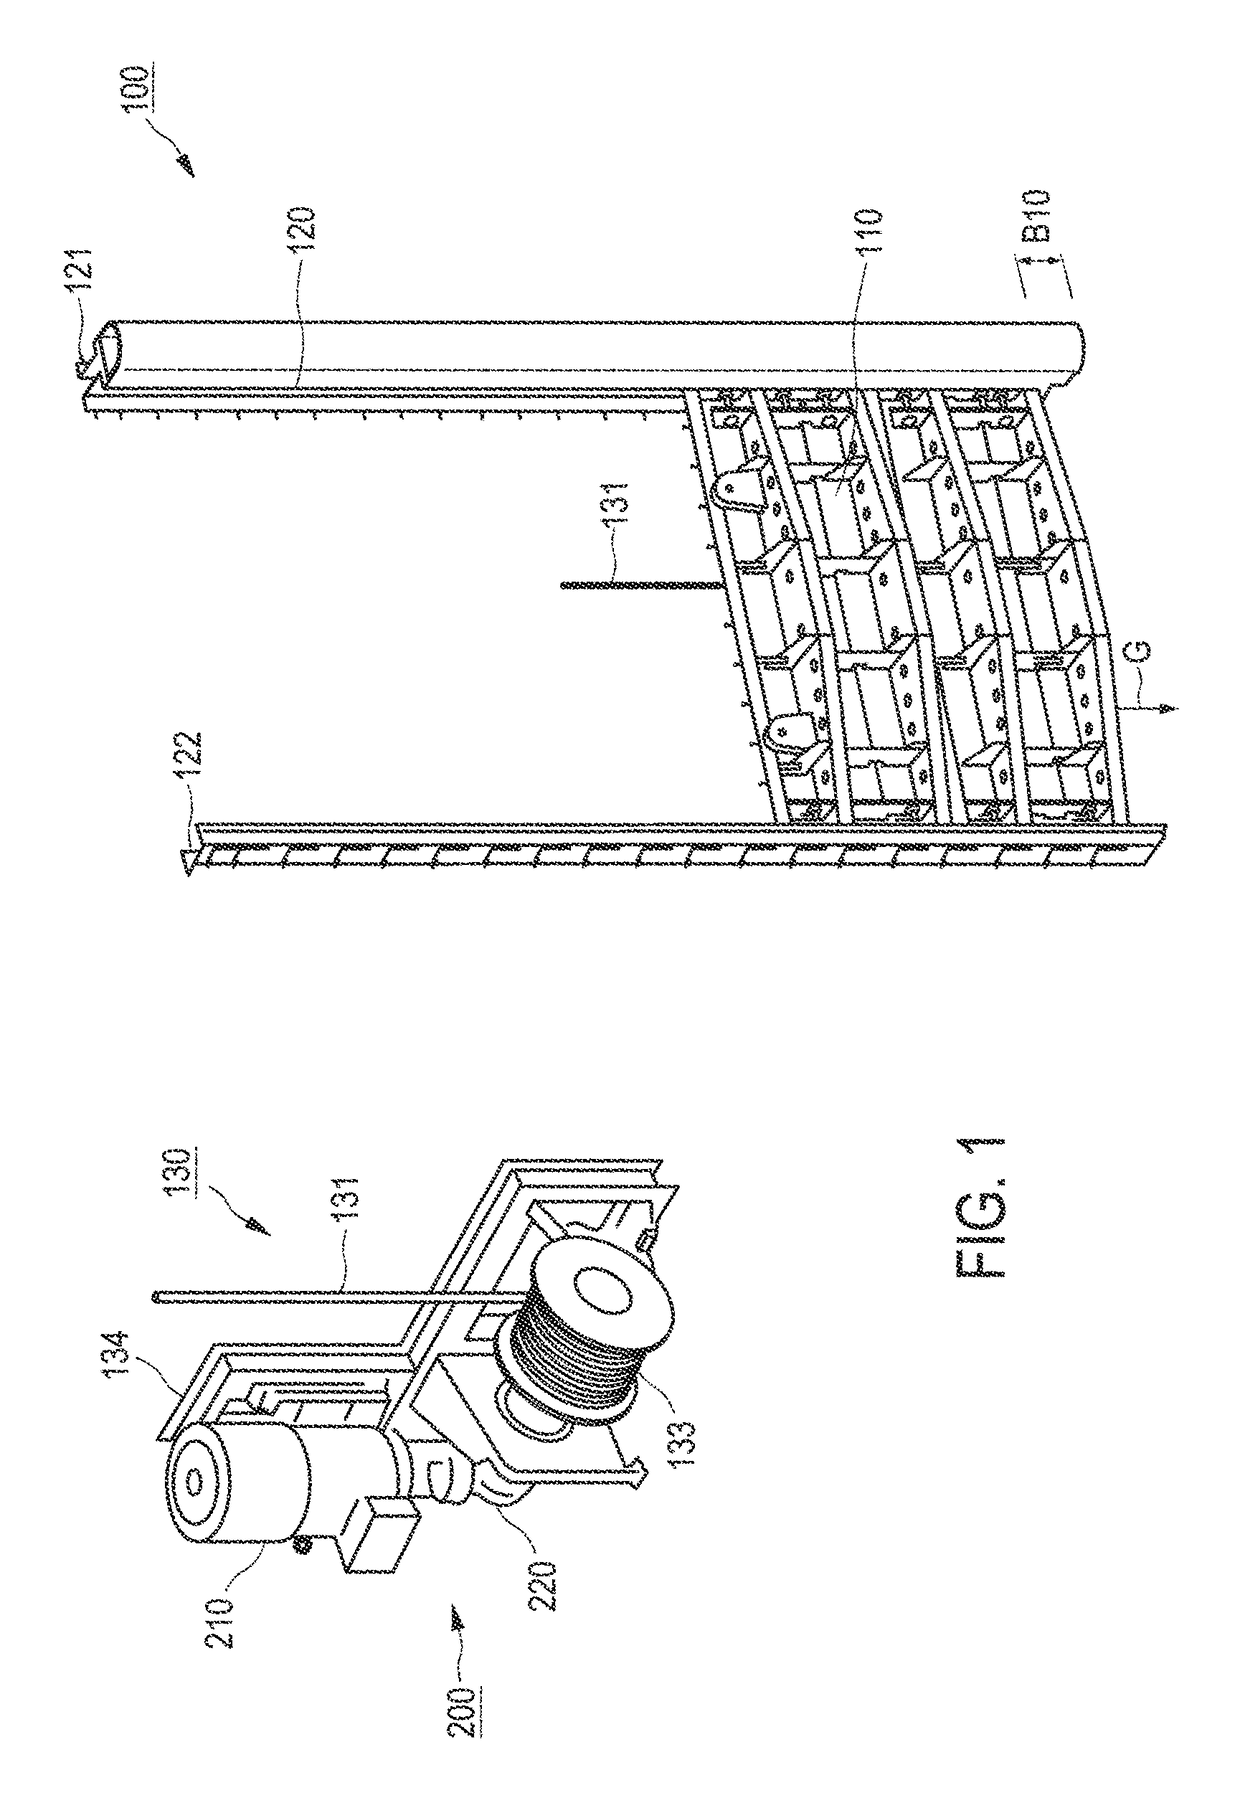 Method for controlling a water sluice gate drive for a water sluice gate having an electric machine, service connection, water sluice gate drive and hydroelectric power plant